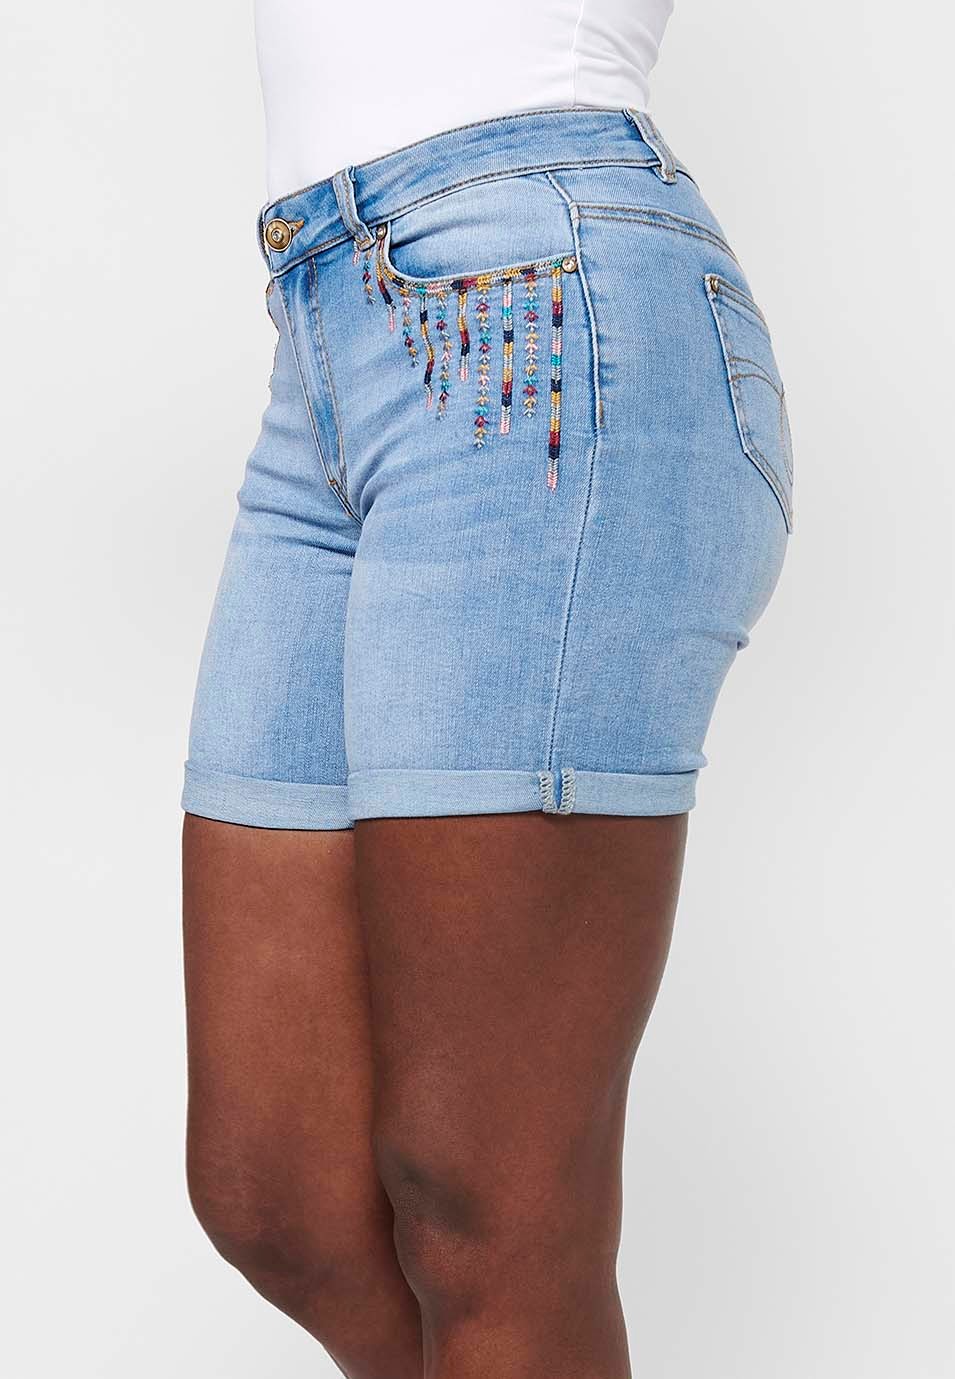 Shorts with cuffed finish with front zipper and button closure with embroidered details in Blue for Women 3